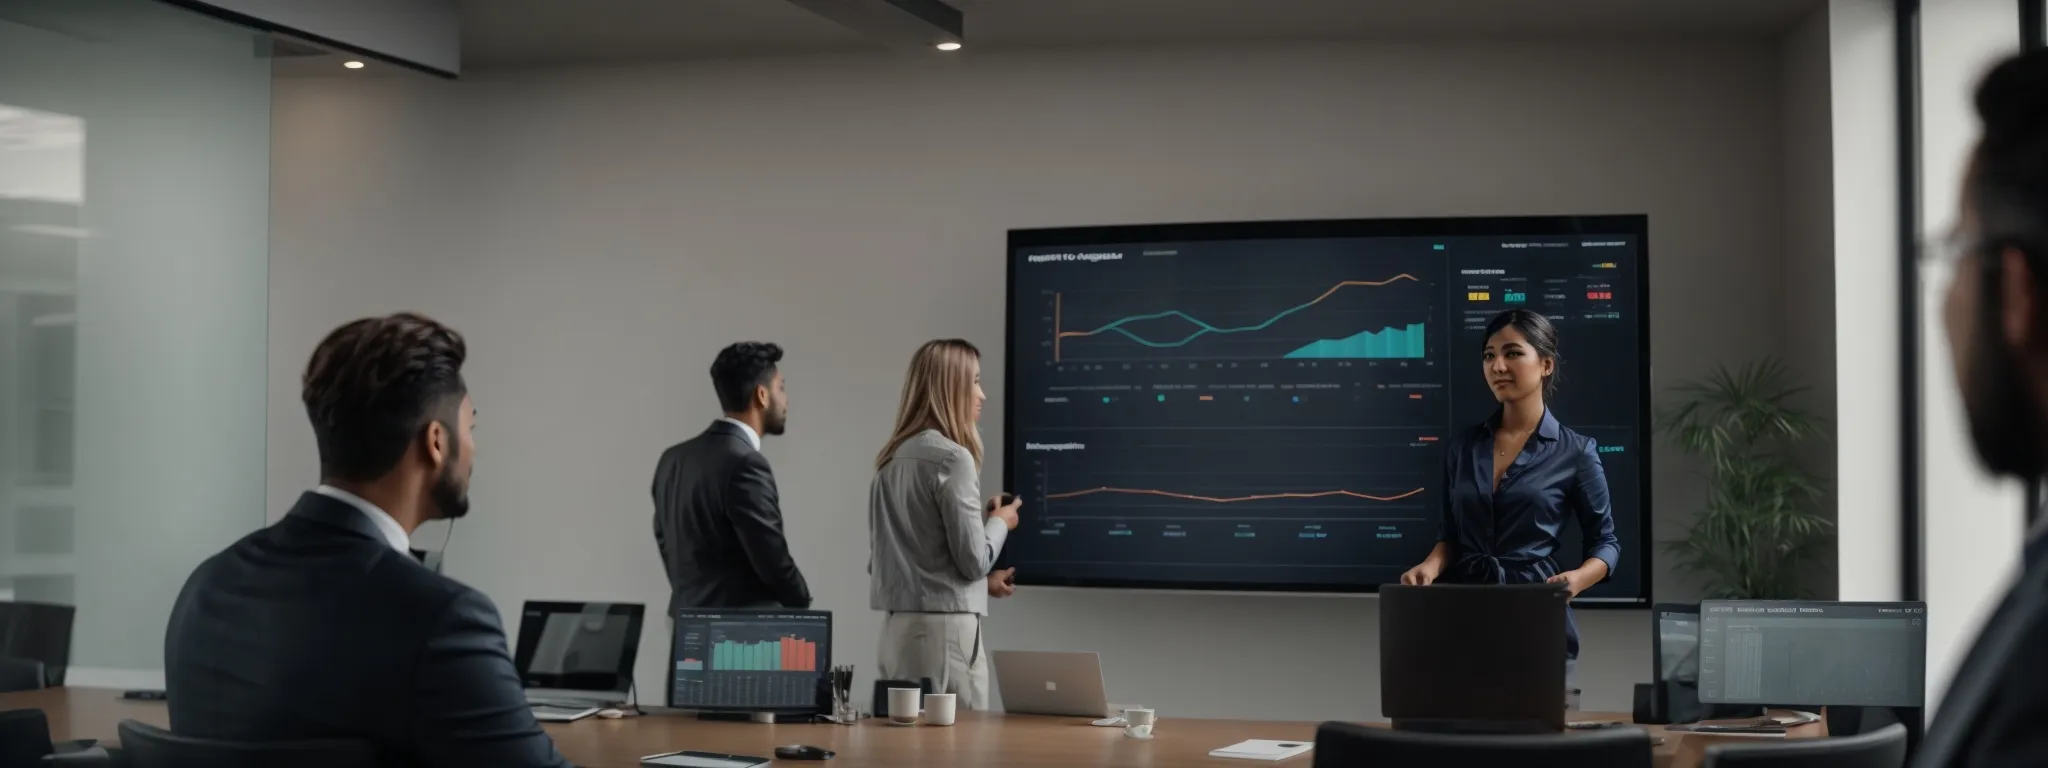 a confident marketing team leader presenting a digital analytics dashboard on a screen to prospective clients in a modern boardroom.